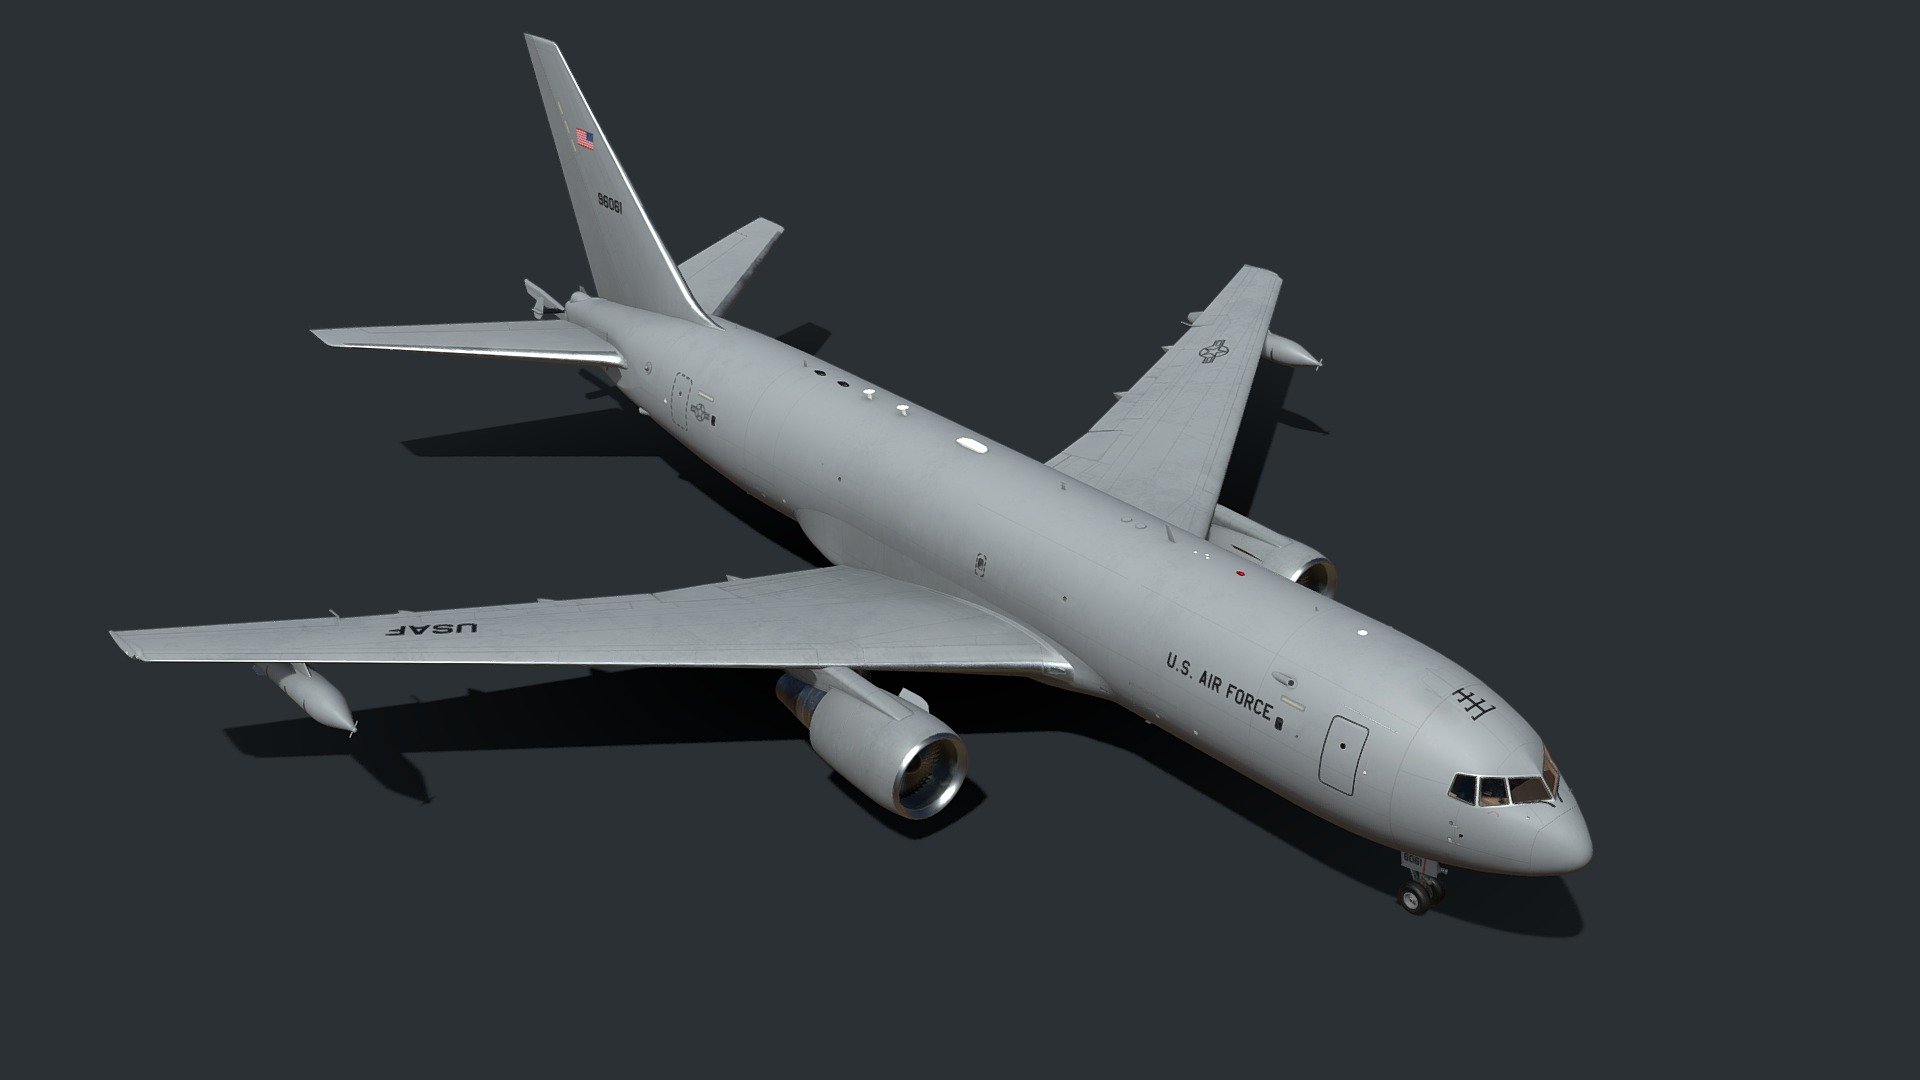 The Boeing KC-46 Pegasus is an American military aerial refueling and strategic military transport aircraft developed by Boeing from its 767 jet airliner. In February 2011, the tanker was selected by the United States Air Force (USAF) as the winner in the KC-X tanker competition to replace older Boeing KC-135 Stratotankers. The first aircraft was delivered to the Air Force in January 2019.[4] The Air Force intends to procure 179 Pegasus aircraft by 2027 3d model